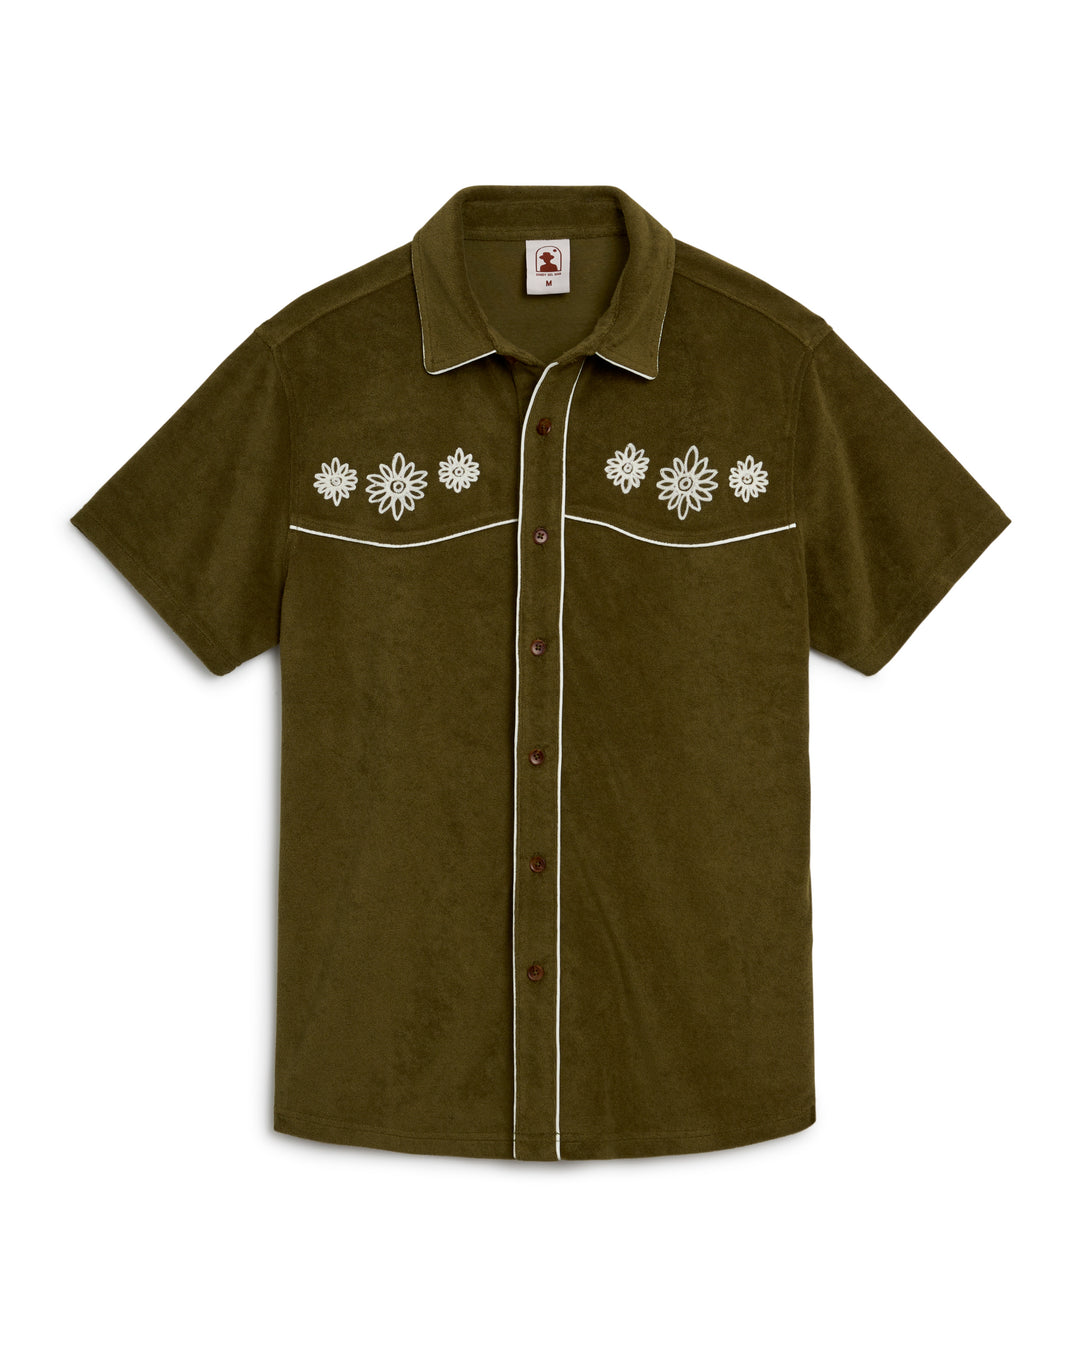 A green Gaucho Shirt - Arbequina with white flowers on it from Dandy Del Mar.